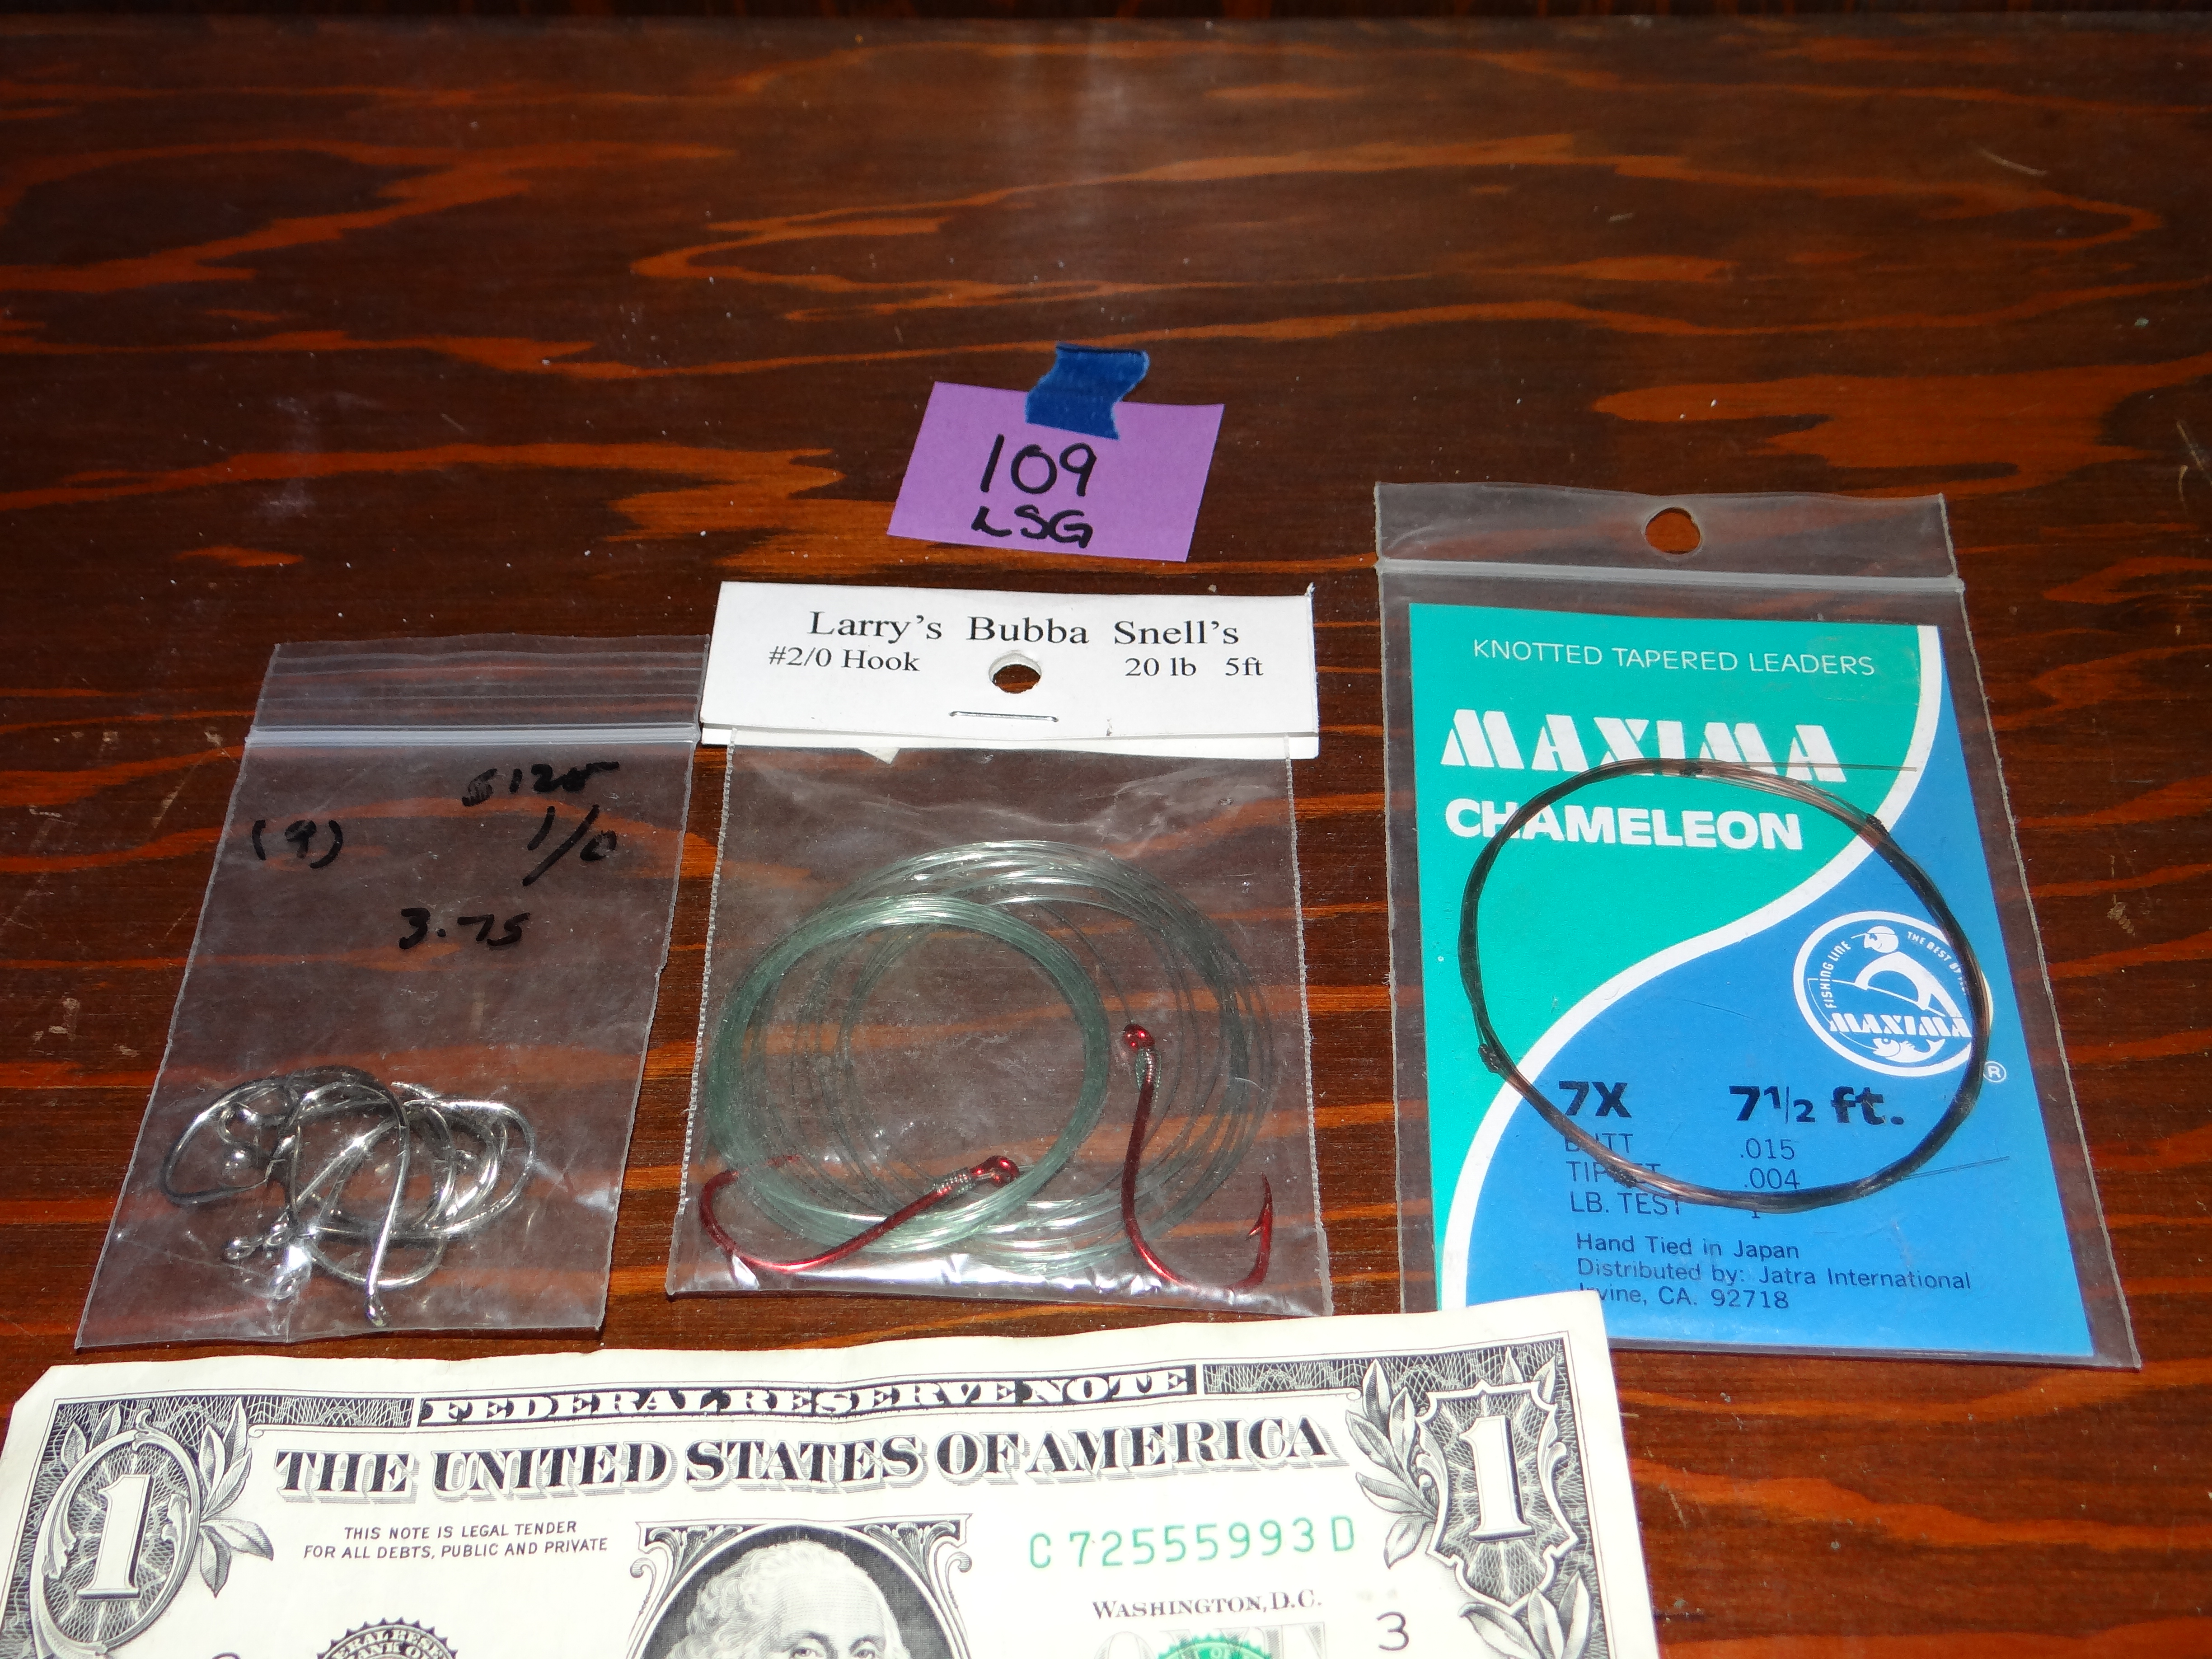 LSG109-Maxima Lead, Larry's Bubba Snell, & 9 Size 1/0 Hooks